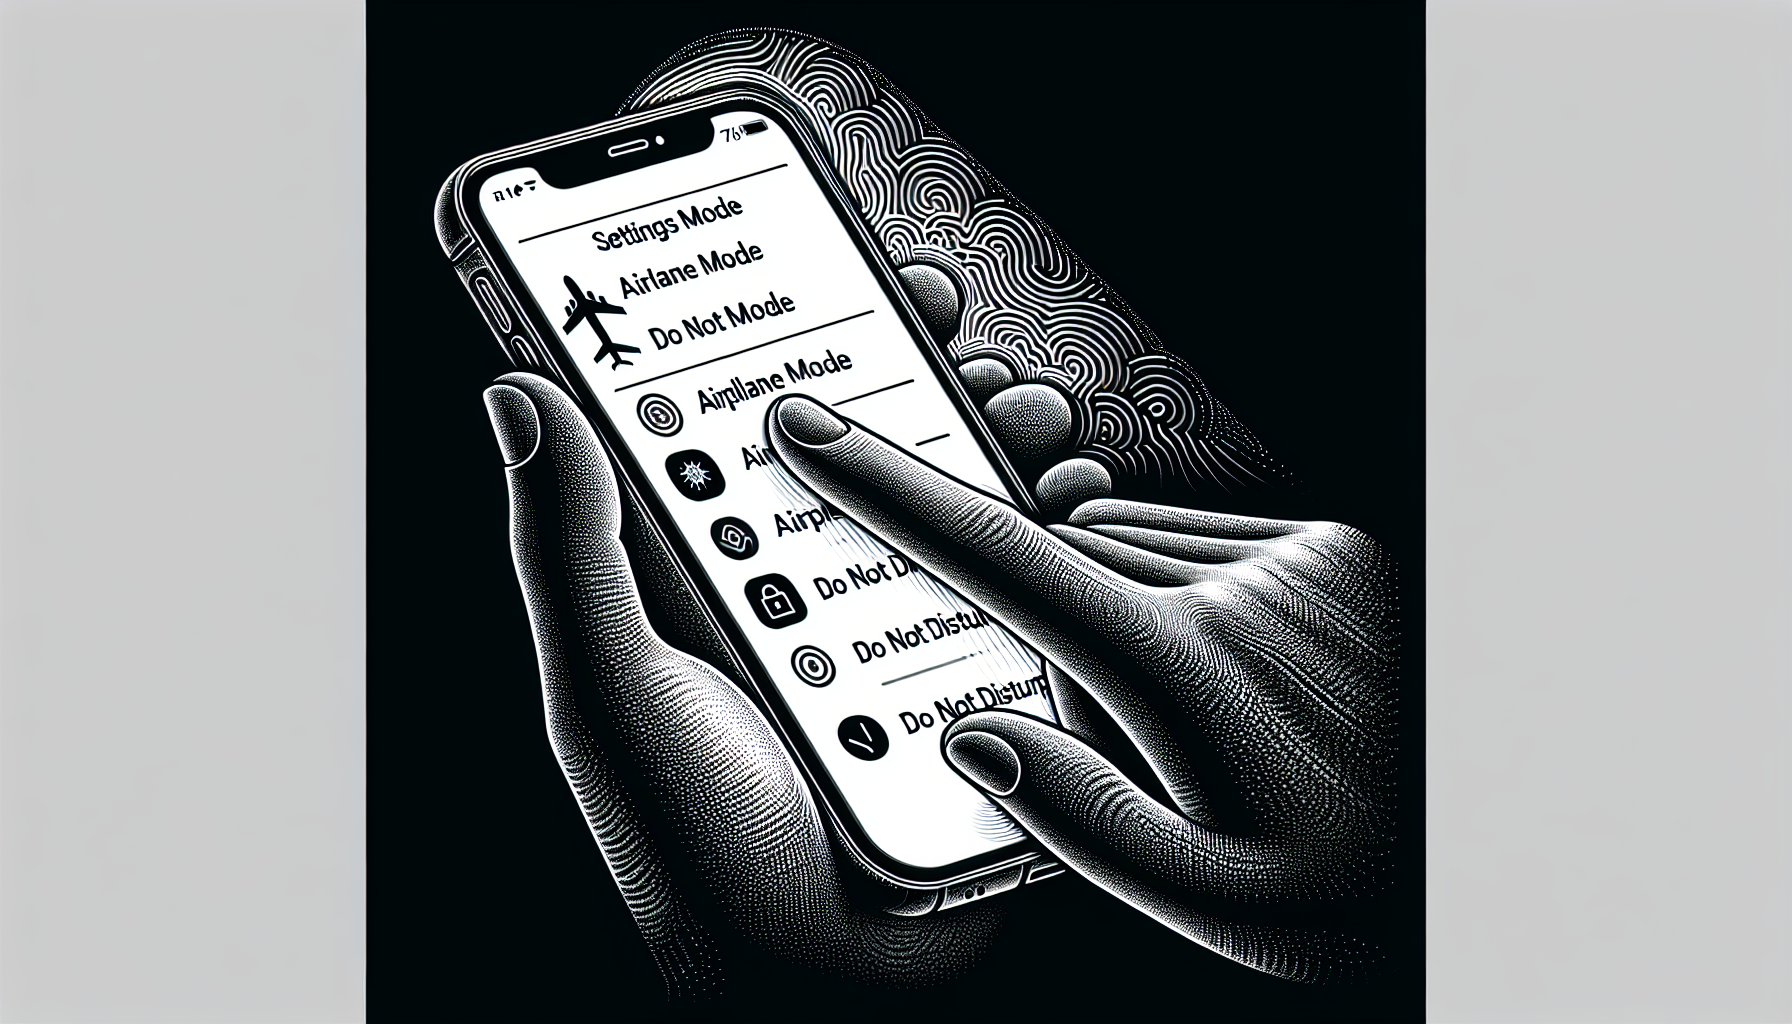 Checking Airplane Mode and Do Not Disturb settings on iPhone